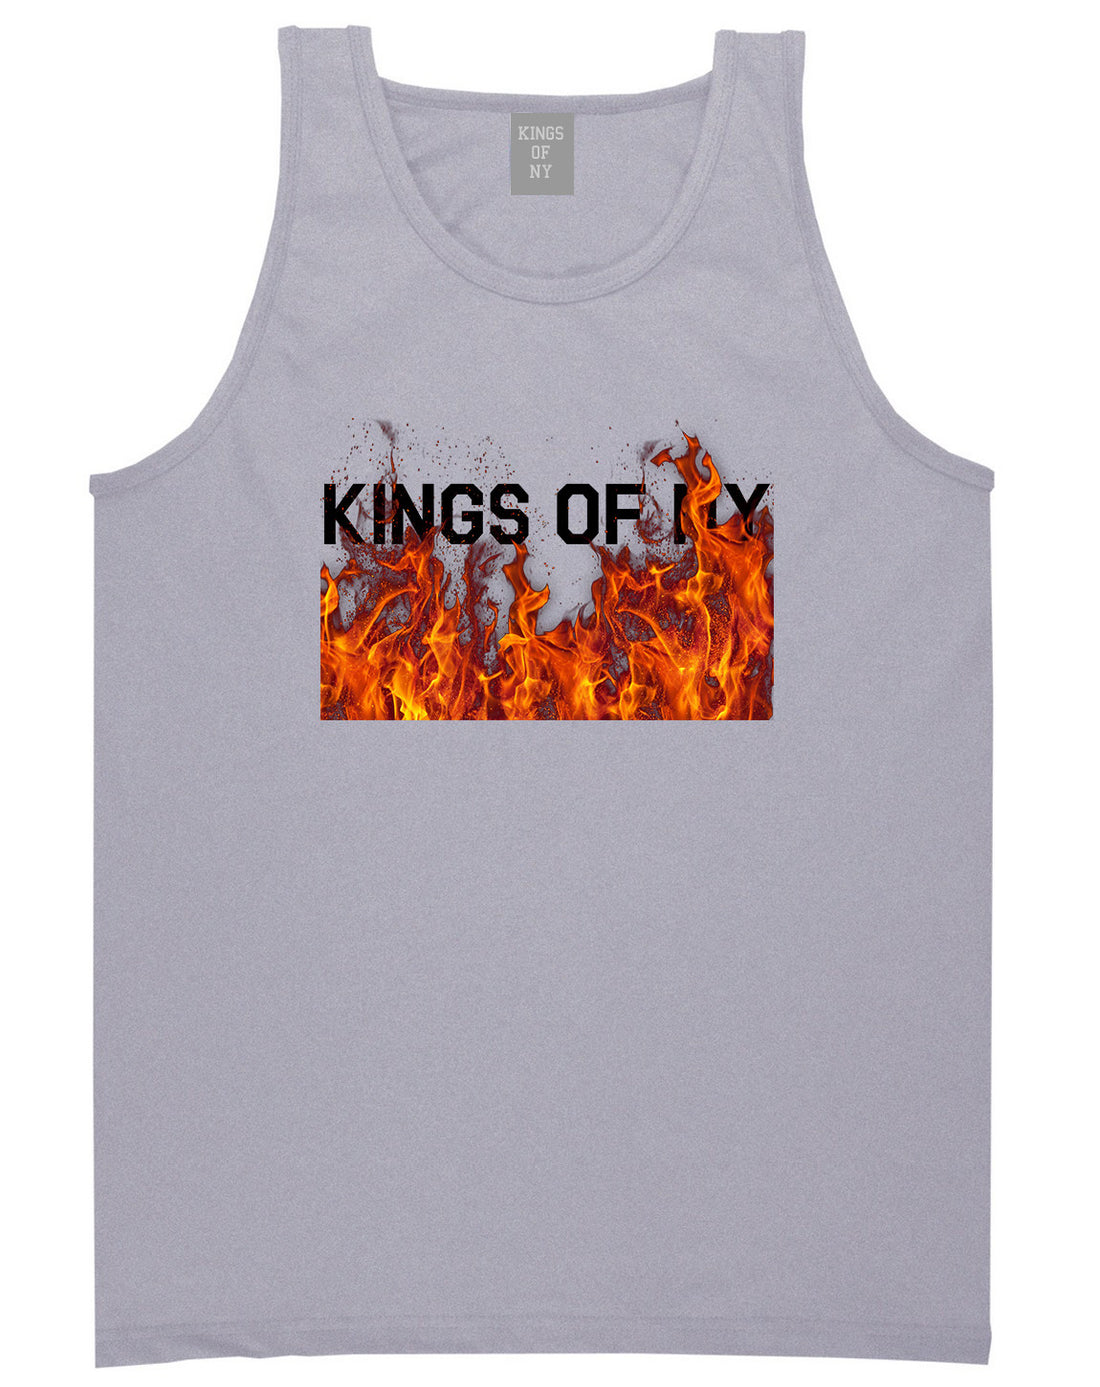 Rising From The Flames Tank Top in Grey